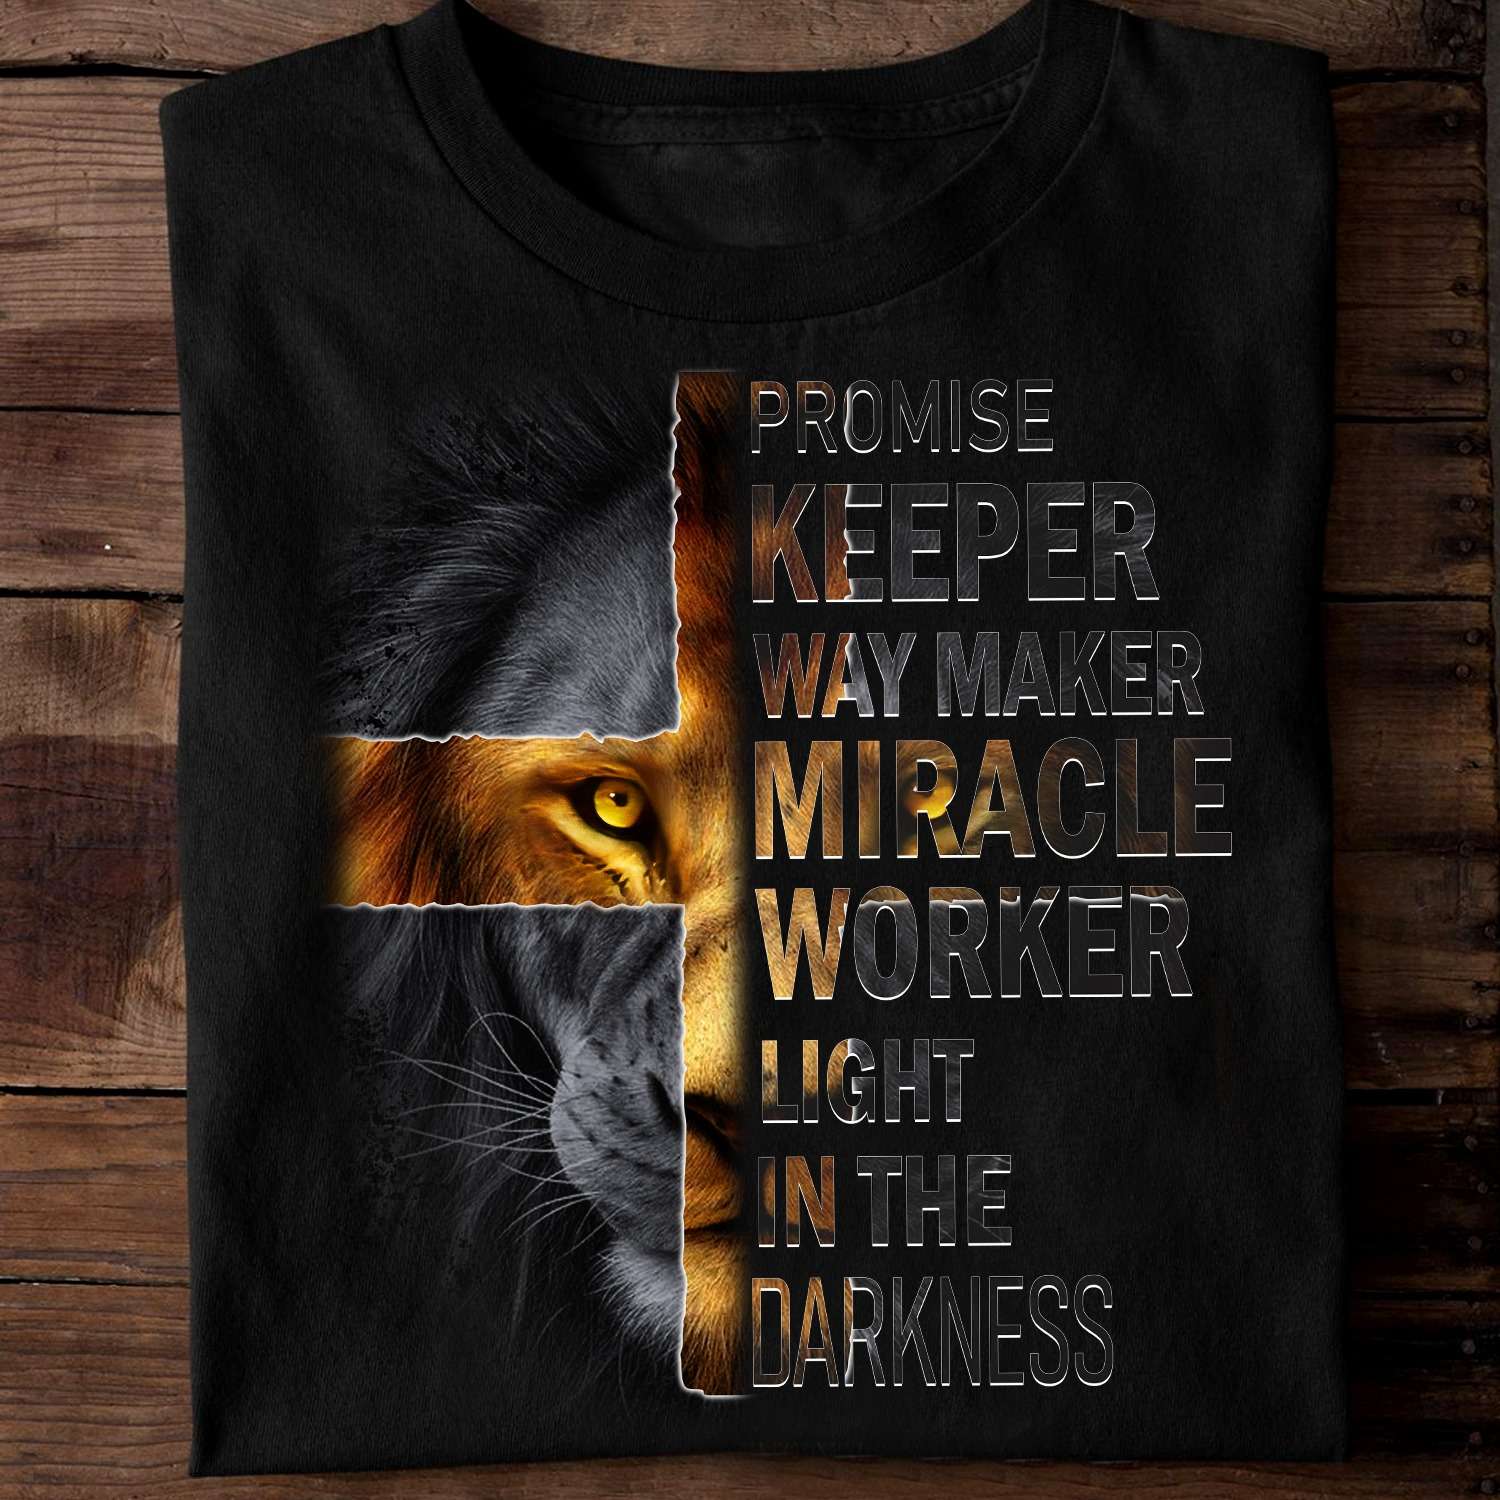 Promise keeper, way maker, miracle woker, light in the darkness - Lion the Jesus